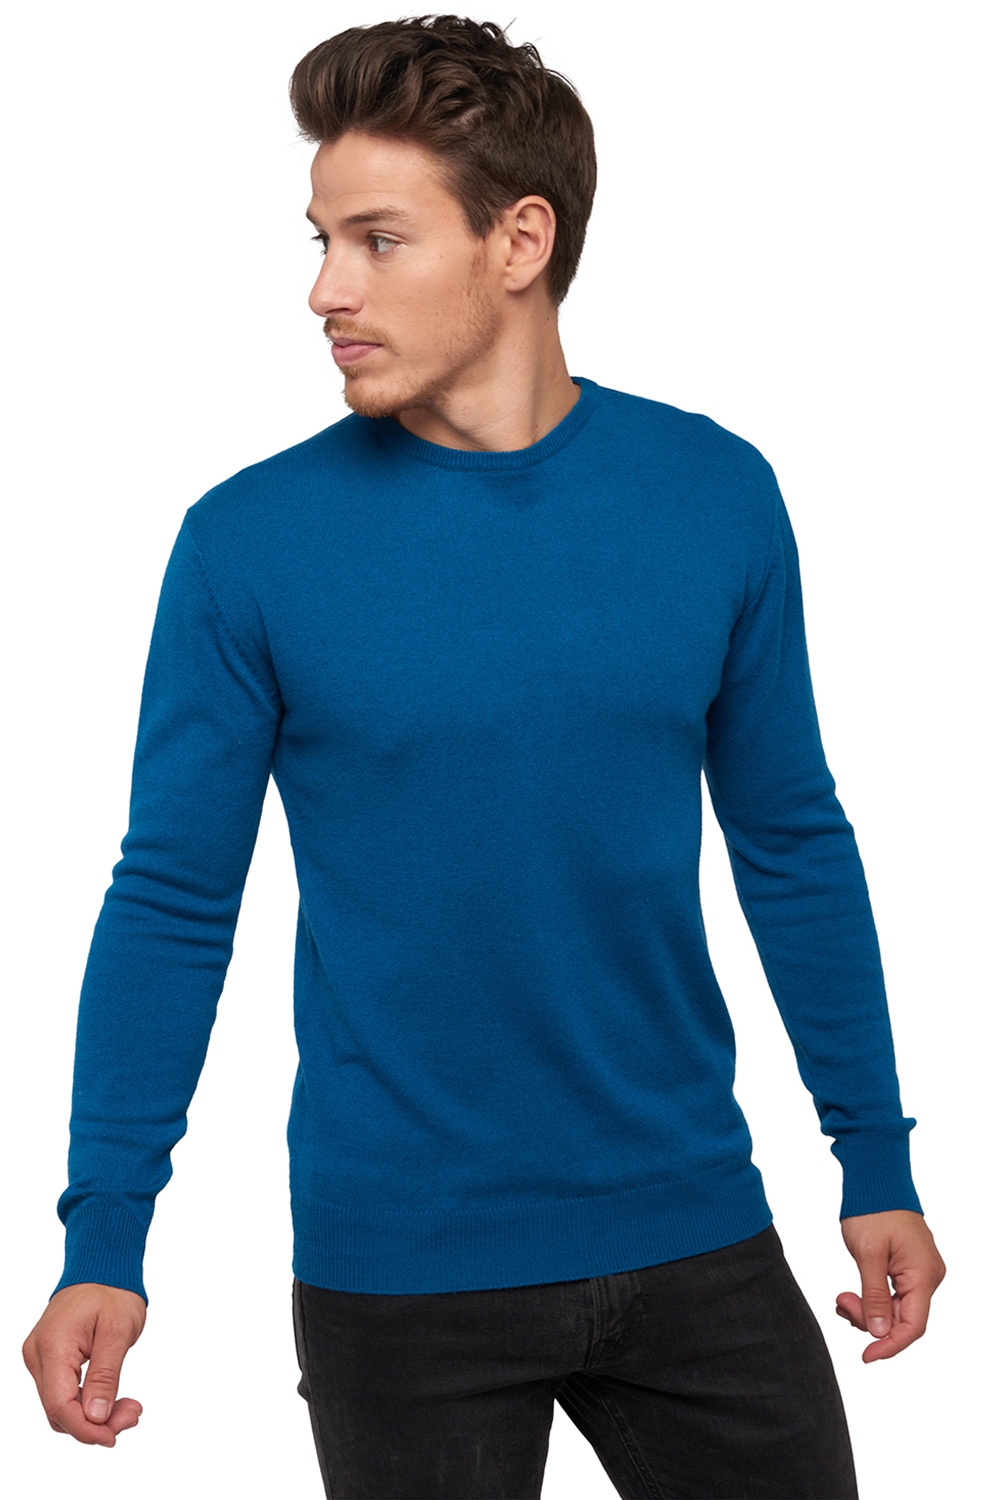 Cachemire pull homme col rond keaton bleu canard m